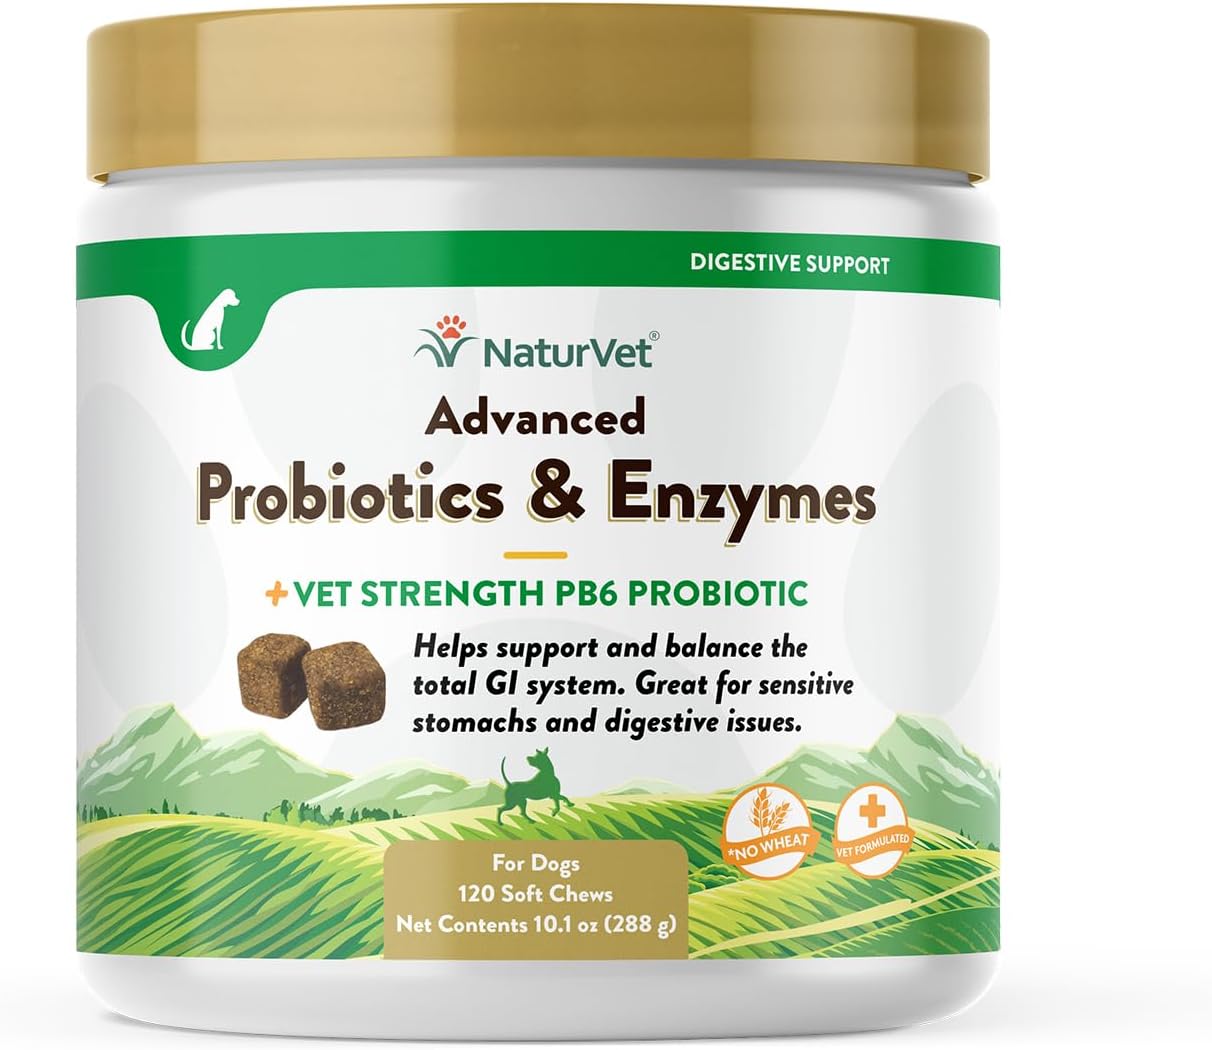 Veterinarian Strength Advanced Probiotics, Healthy Enzymes and PB6 Probiotic Supplement For Your Dogs Stomach, Intestine, Digestion and GI Tract health, Made by NaturVet, 120 Soft Chews